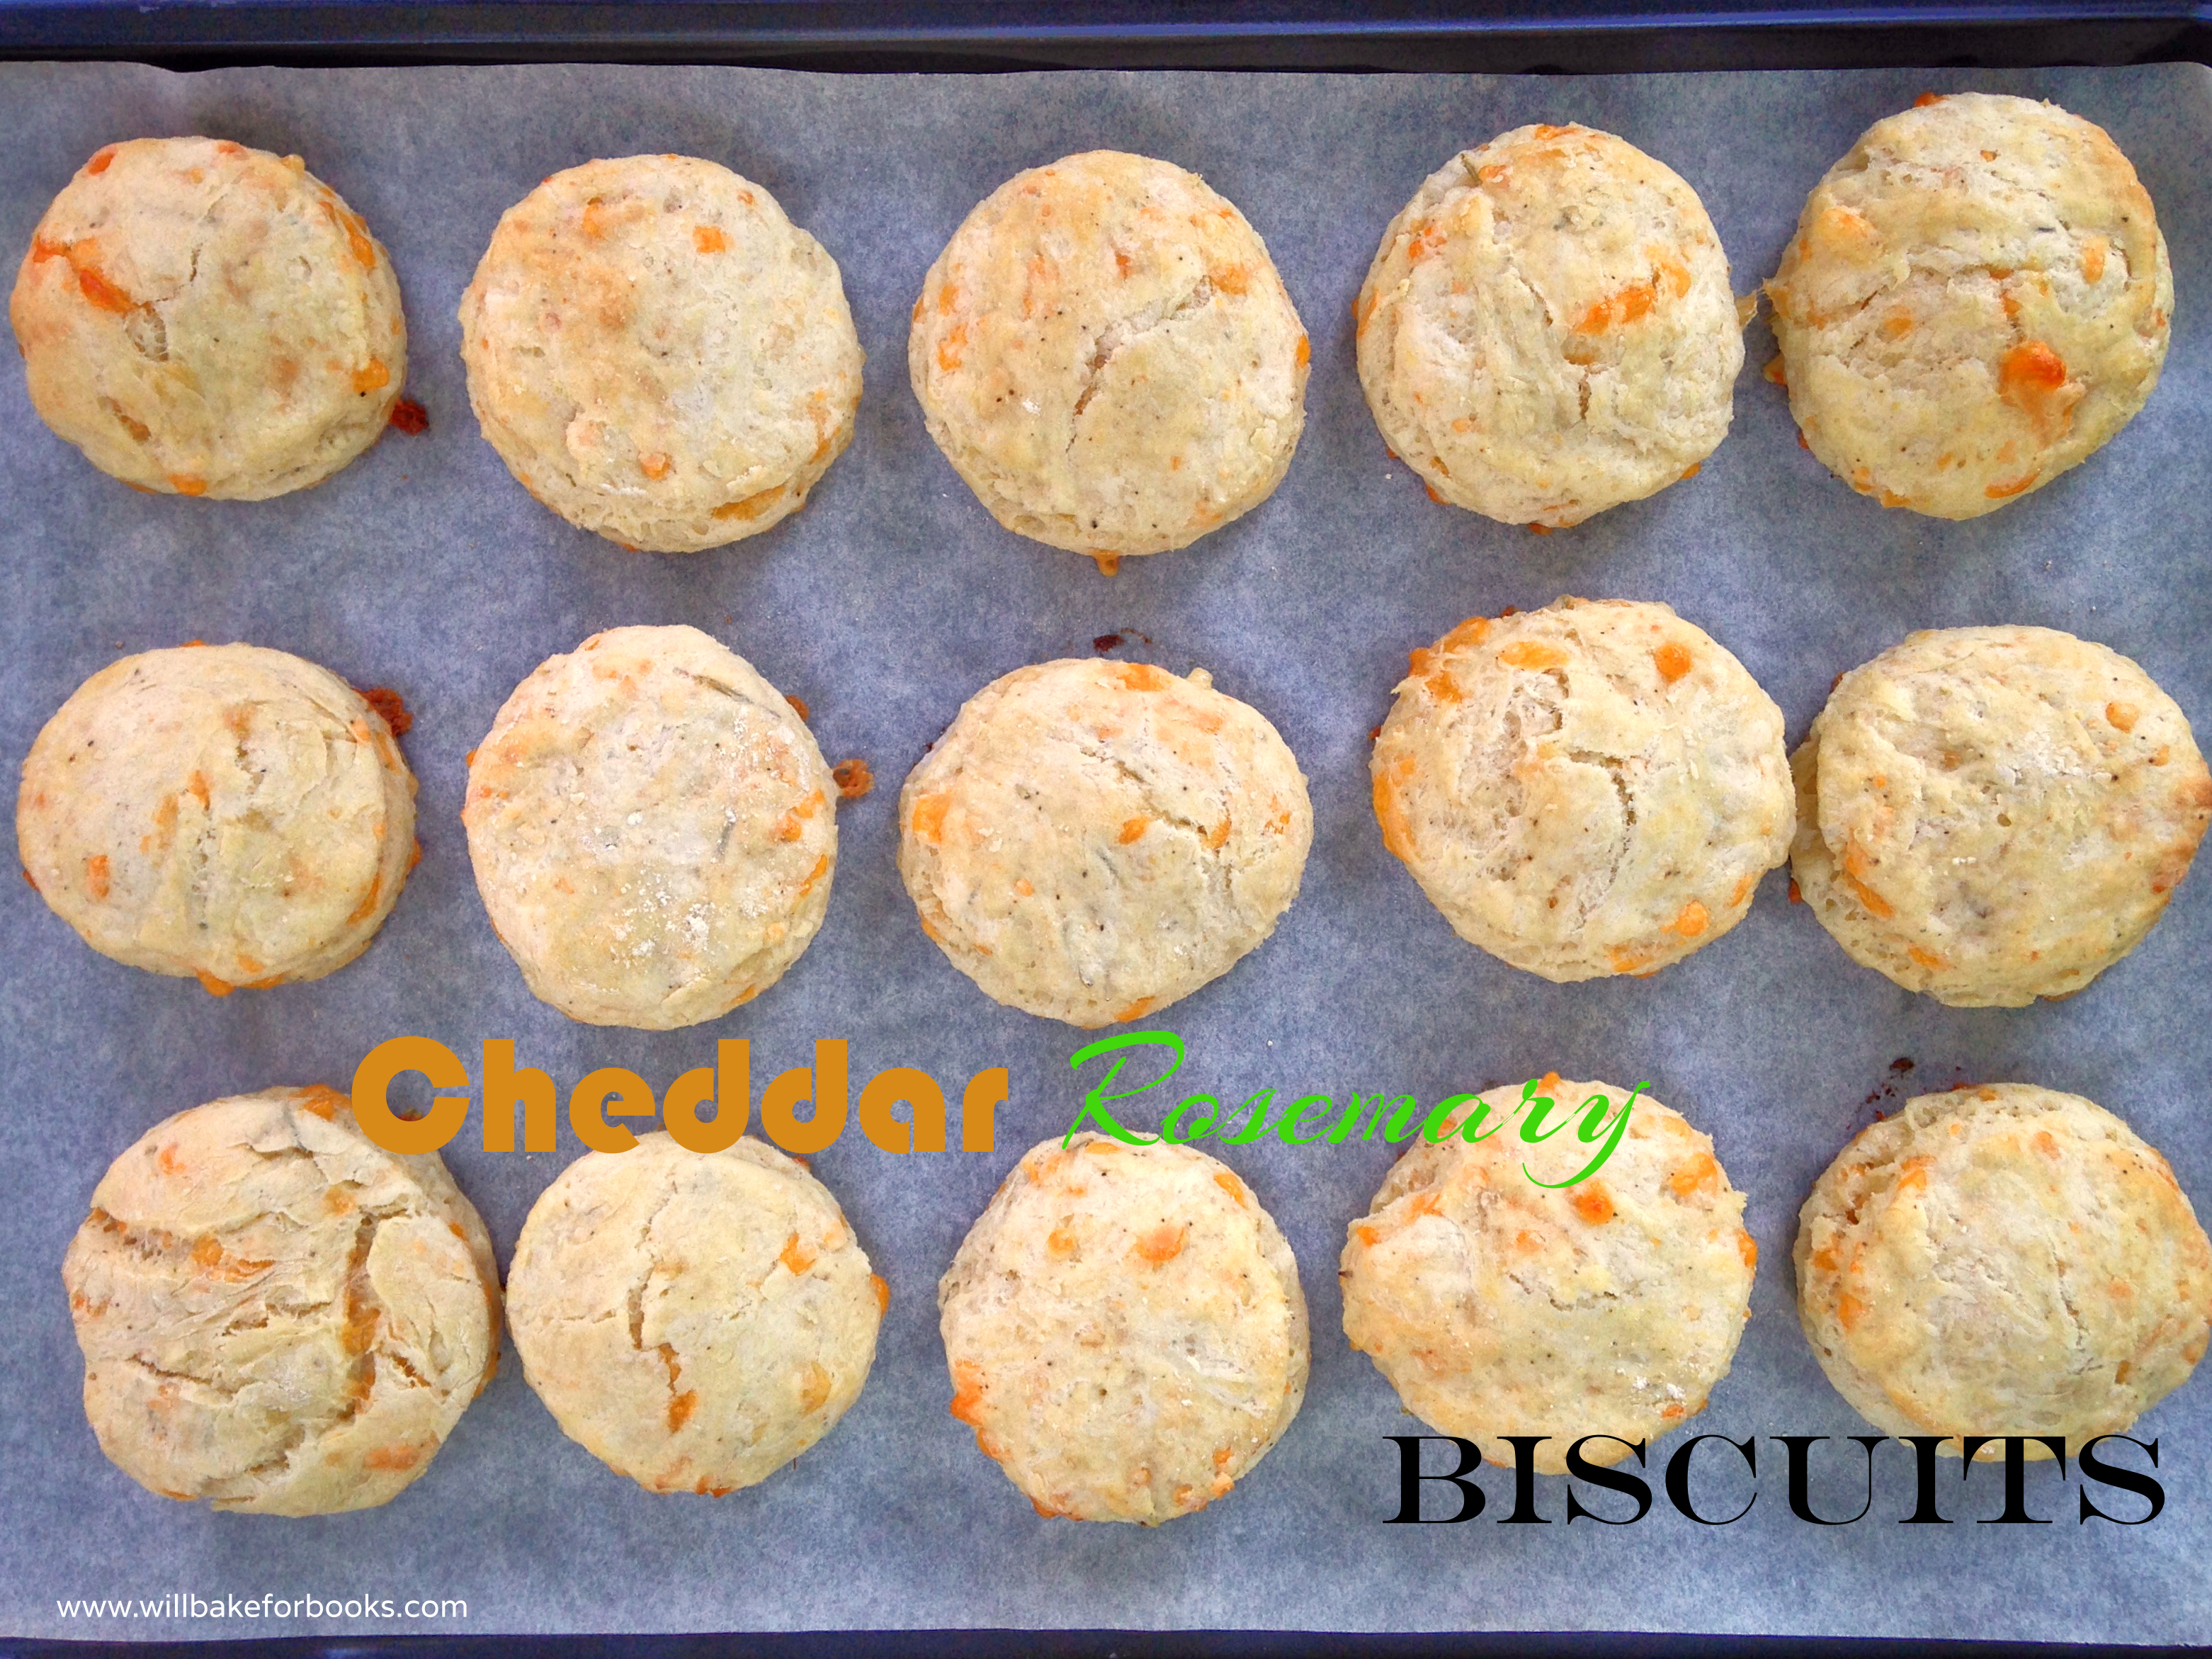 Cheddar Rosemary Biscuits from www.willbakeforbooks.com